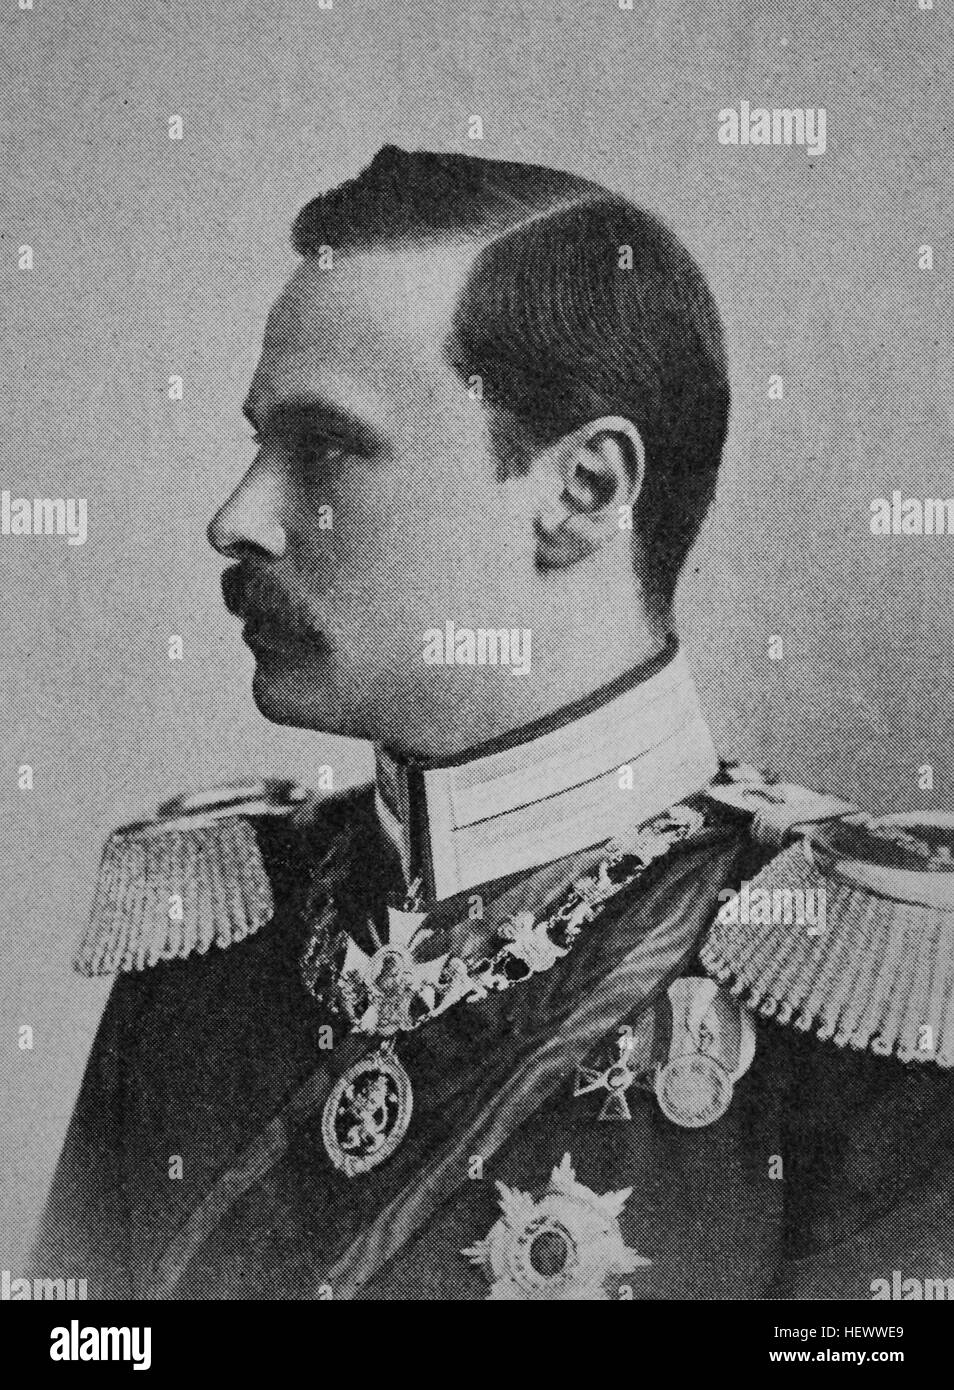 Ernest Louis Charles Albert William, Ernst Ludwig Karl Albrecht Wilhelm, 25  November 1868 - 9 October 1937, last Grand Duke of Hesse and by Rhine from  1892 until 1918, picture from 1895, digital improved Stock Photo - Alamy